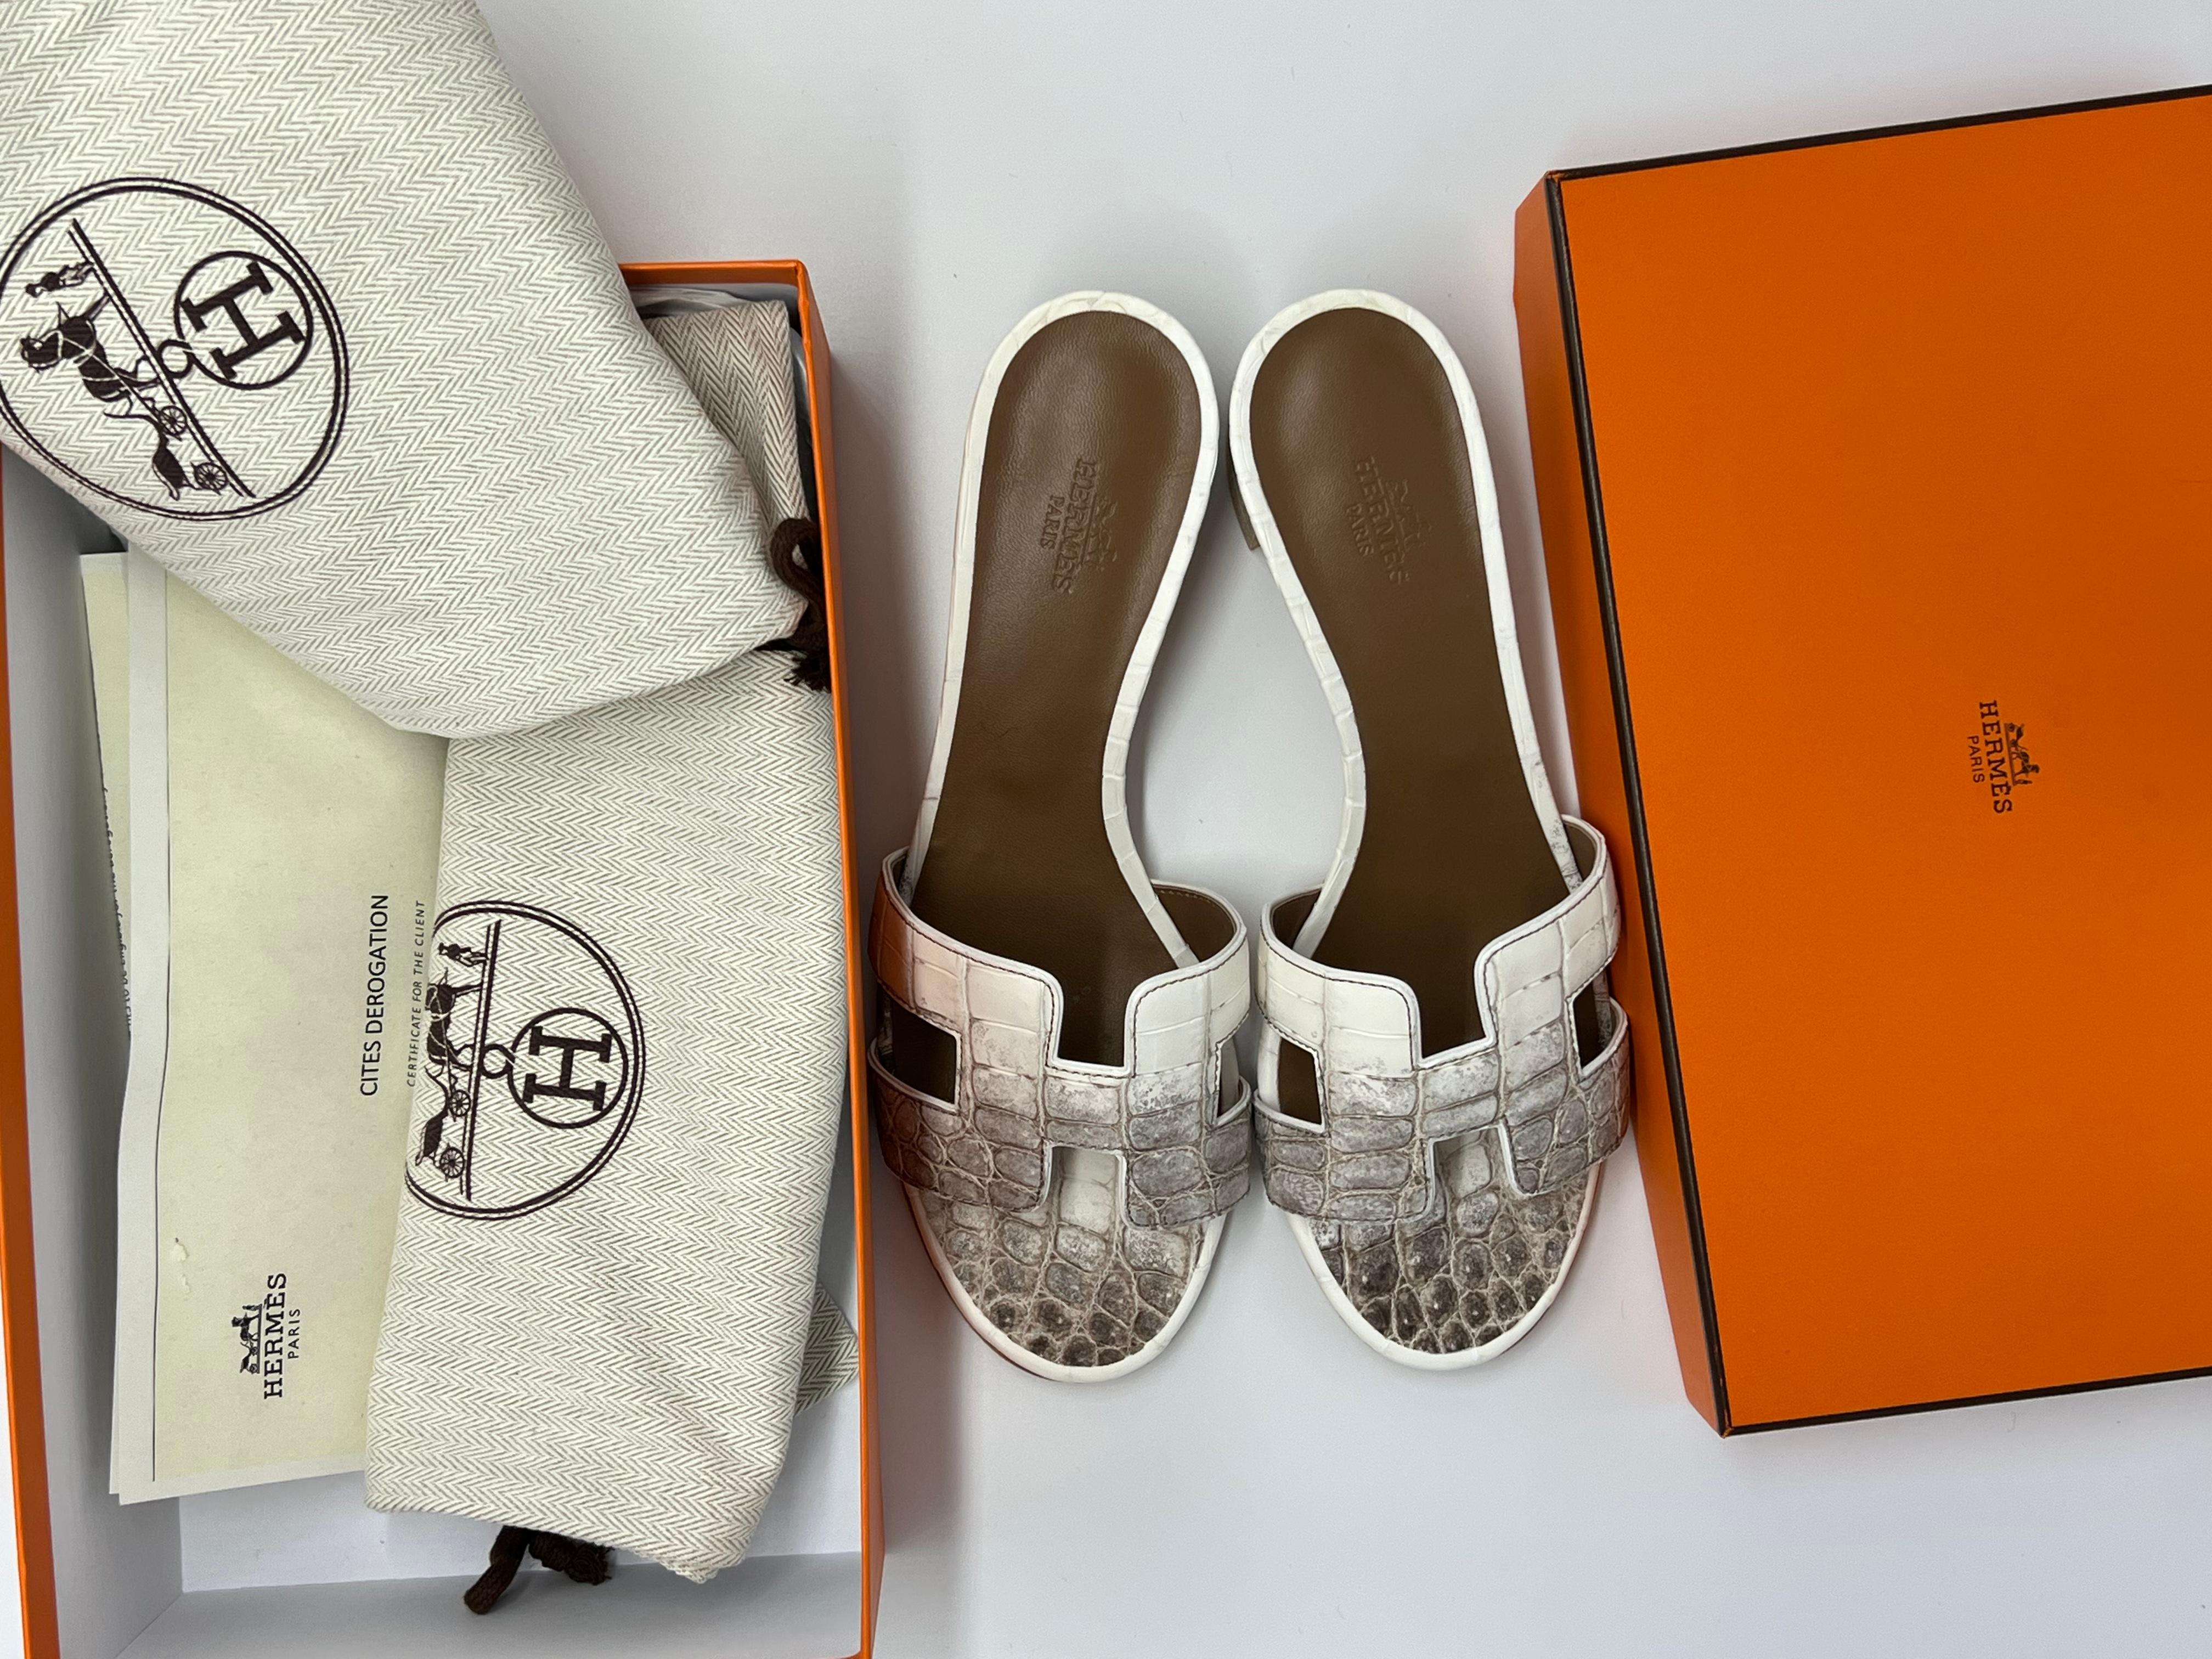 Hermes Himalaya crocodile oasis sandals In New Condition For Sale In London, England